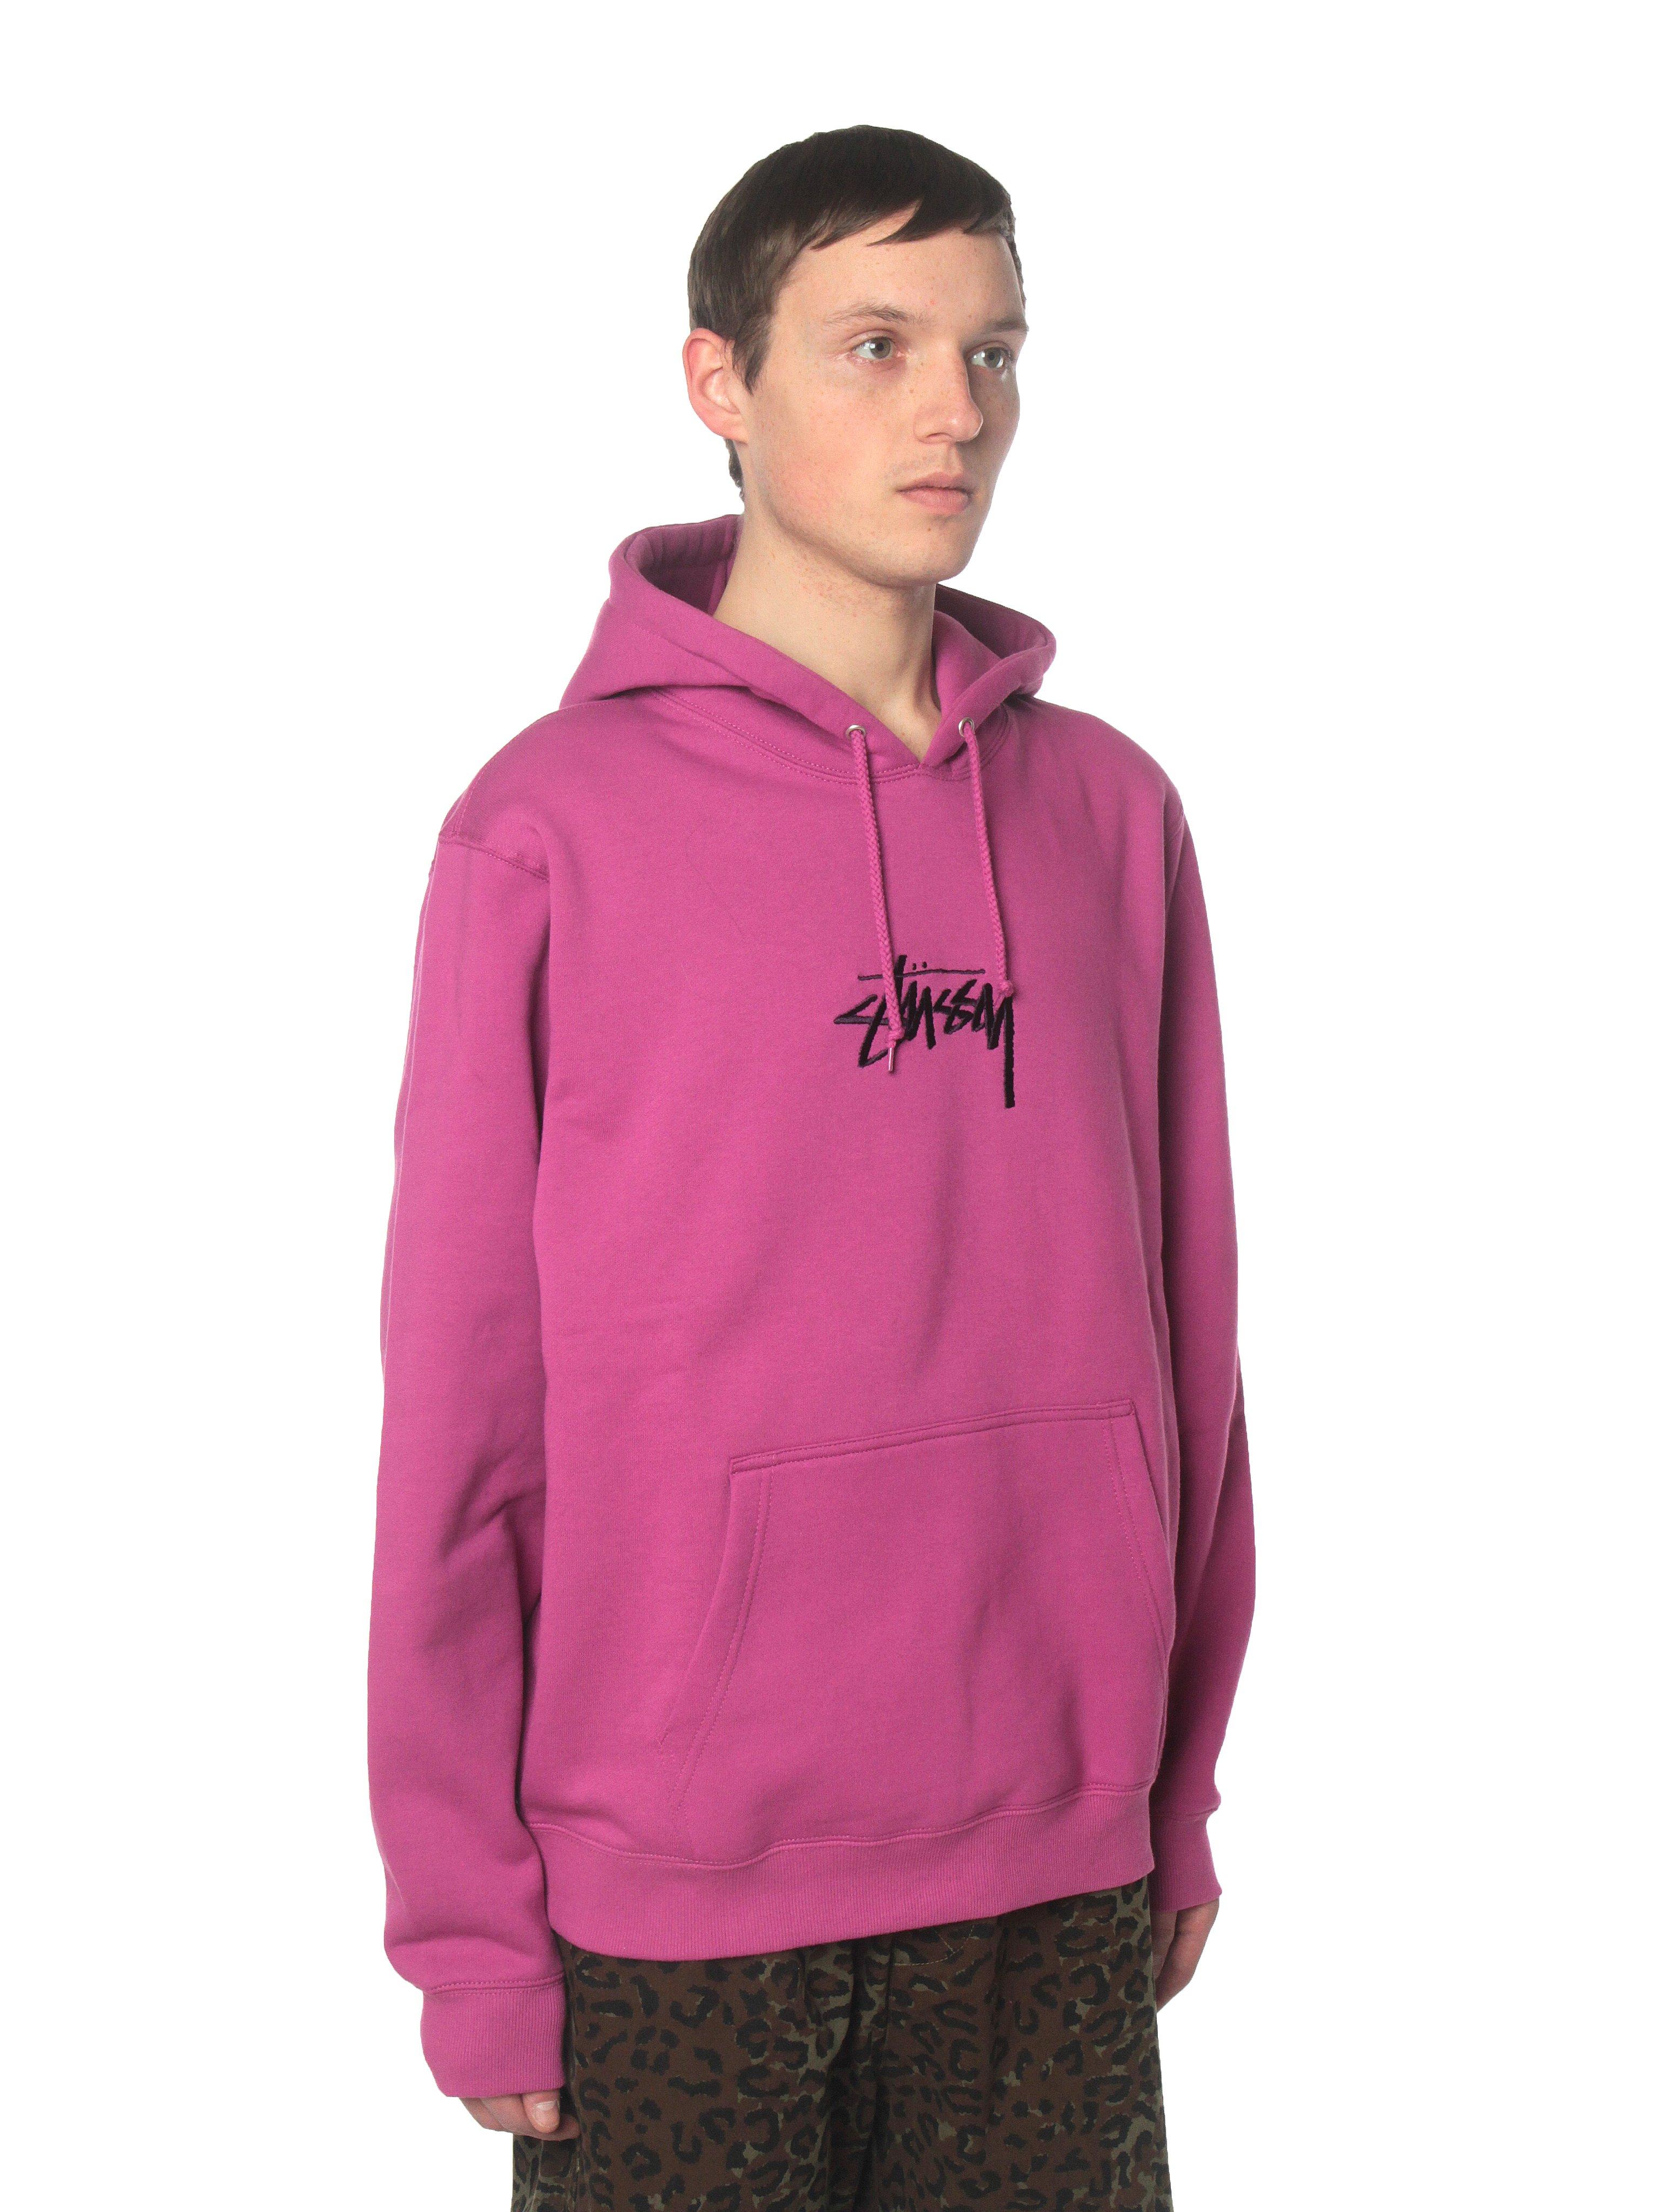 Stussy Cotton Stock Logo Hoodie in Berry (Pink) for Men - Lyst